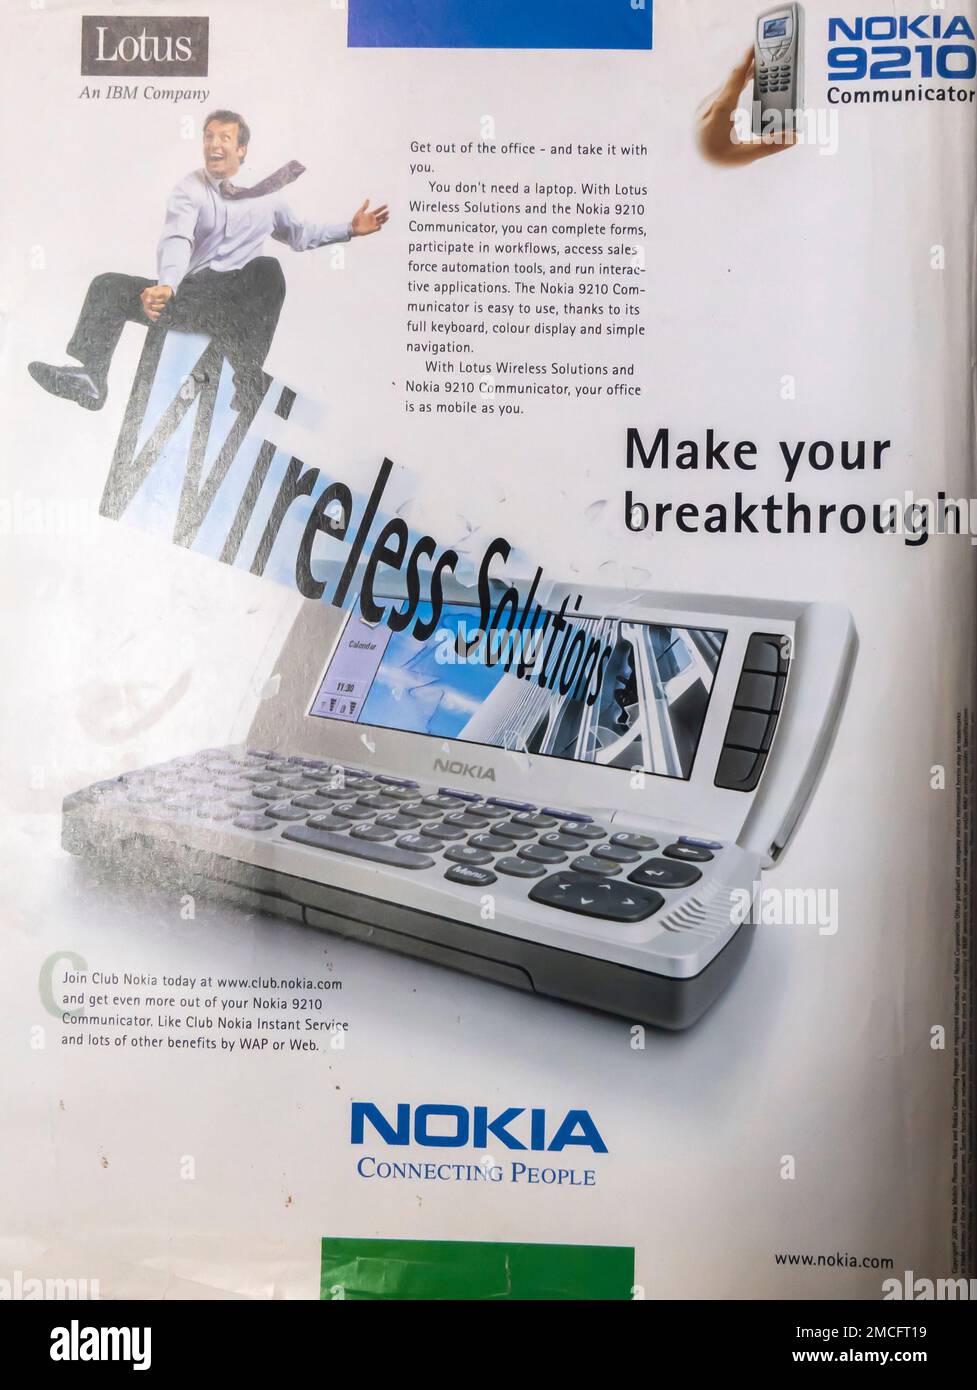 Nokia 9210 communicator advert in TIME magazine - July 30, 2001. Mobile phones adverts. Cell phone old advert. First cellphones adverts. Stock Photo